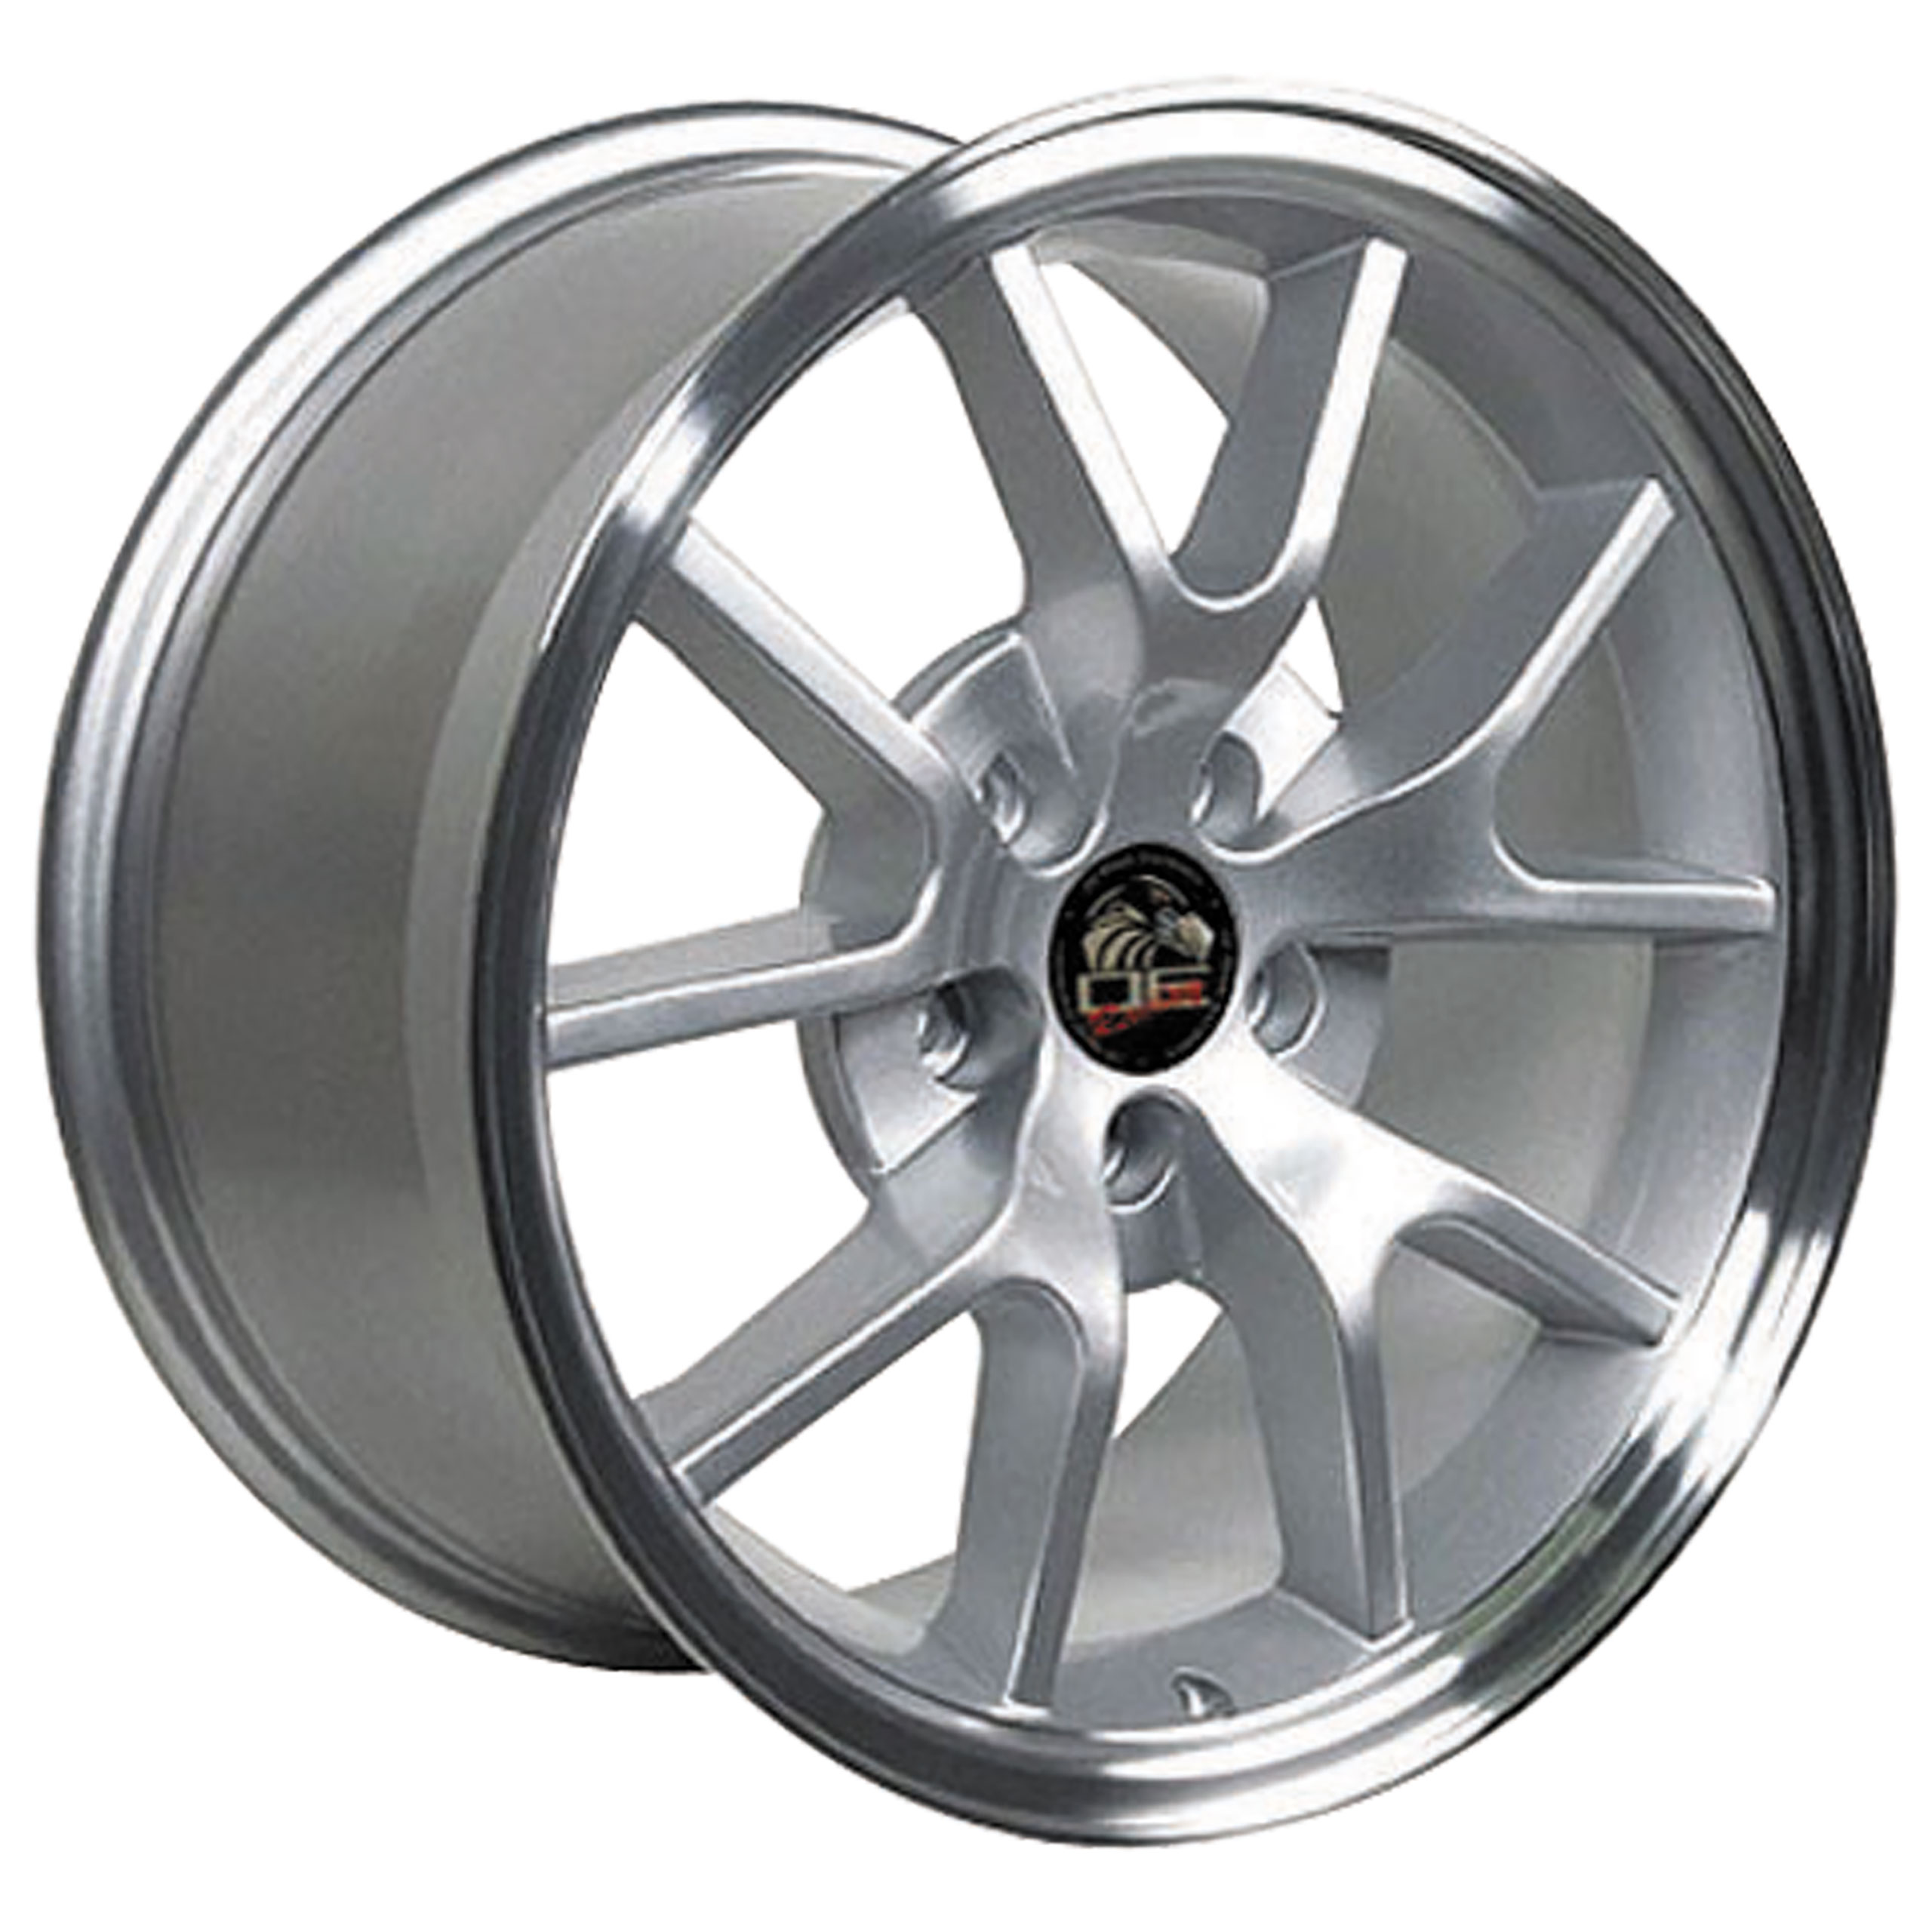 1994-2004 Ford Mustang C4-C5 FR500 Wheel - Silver Machined Lip 18x9 CA-MA23032